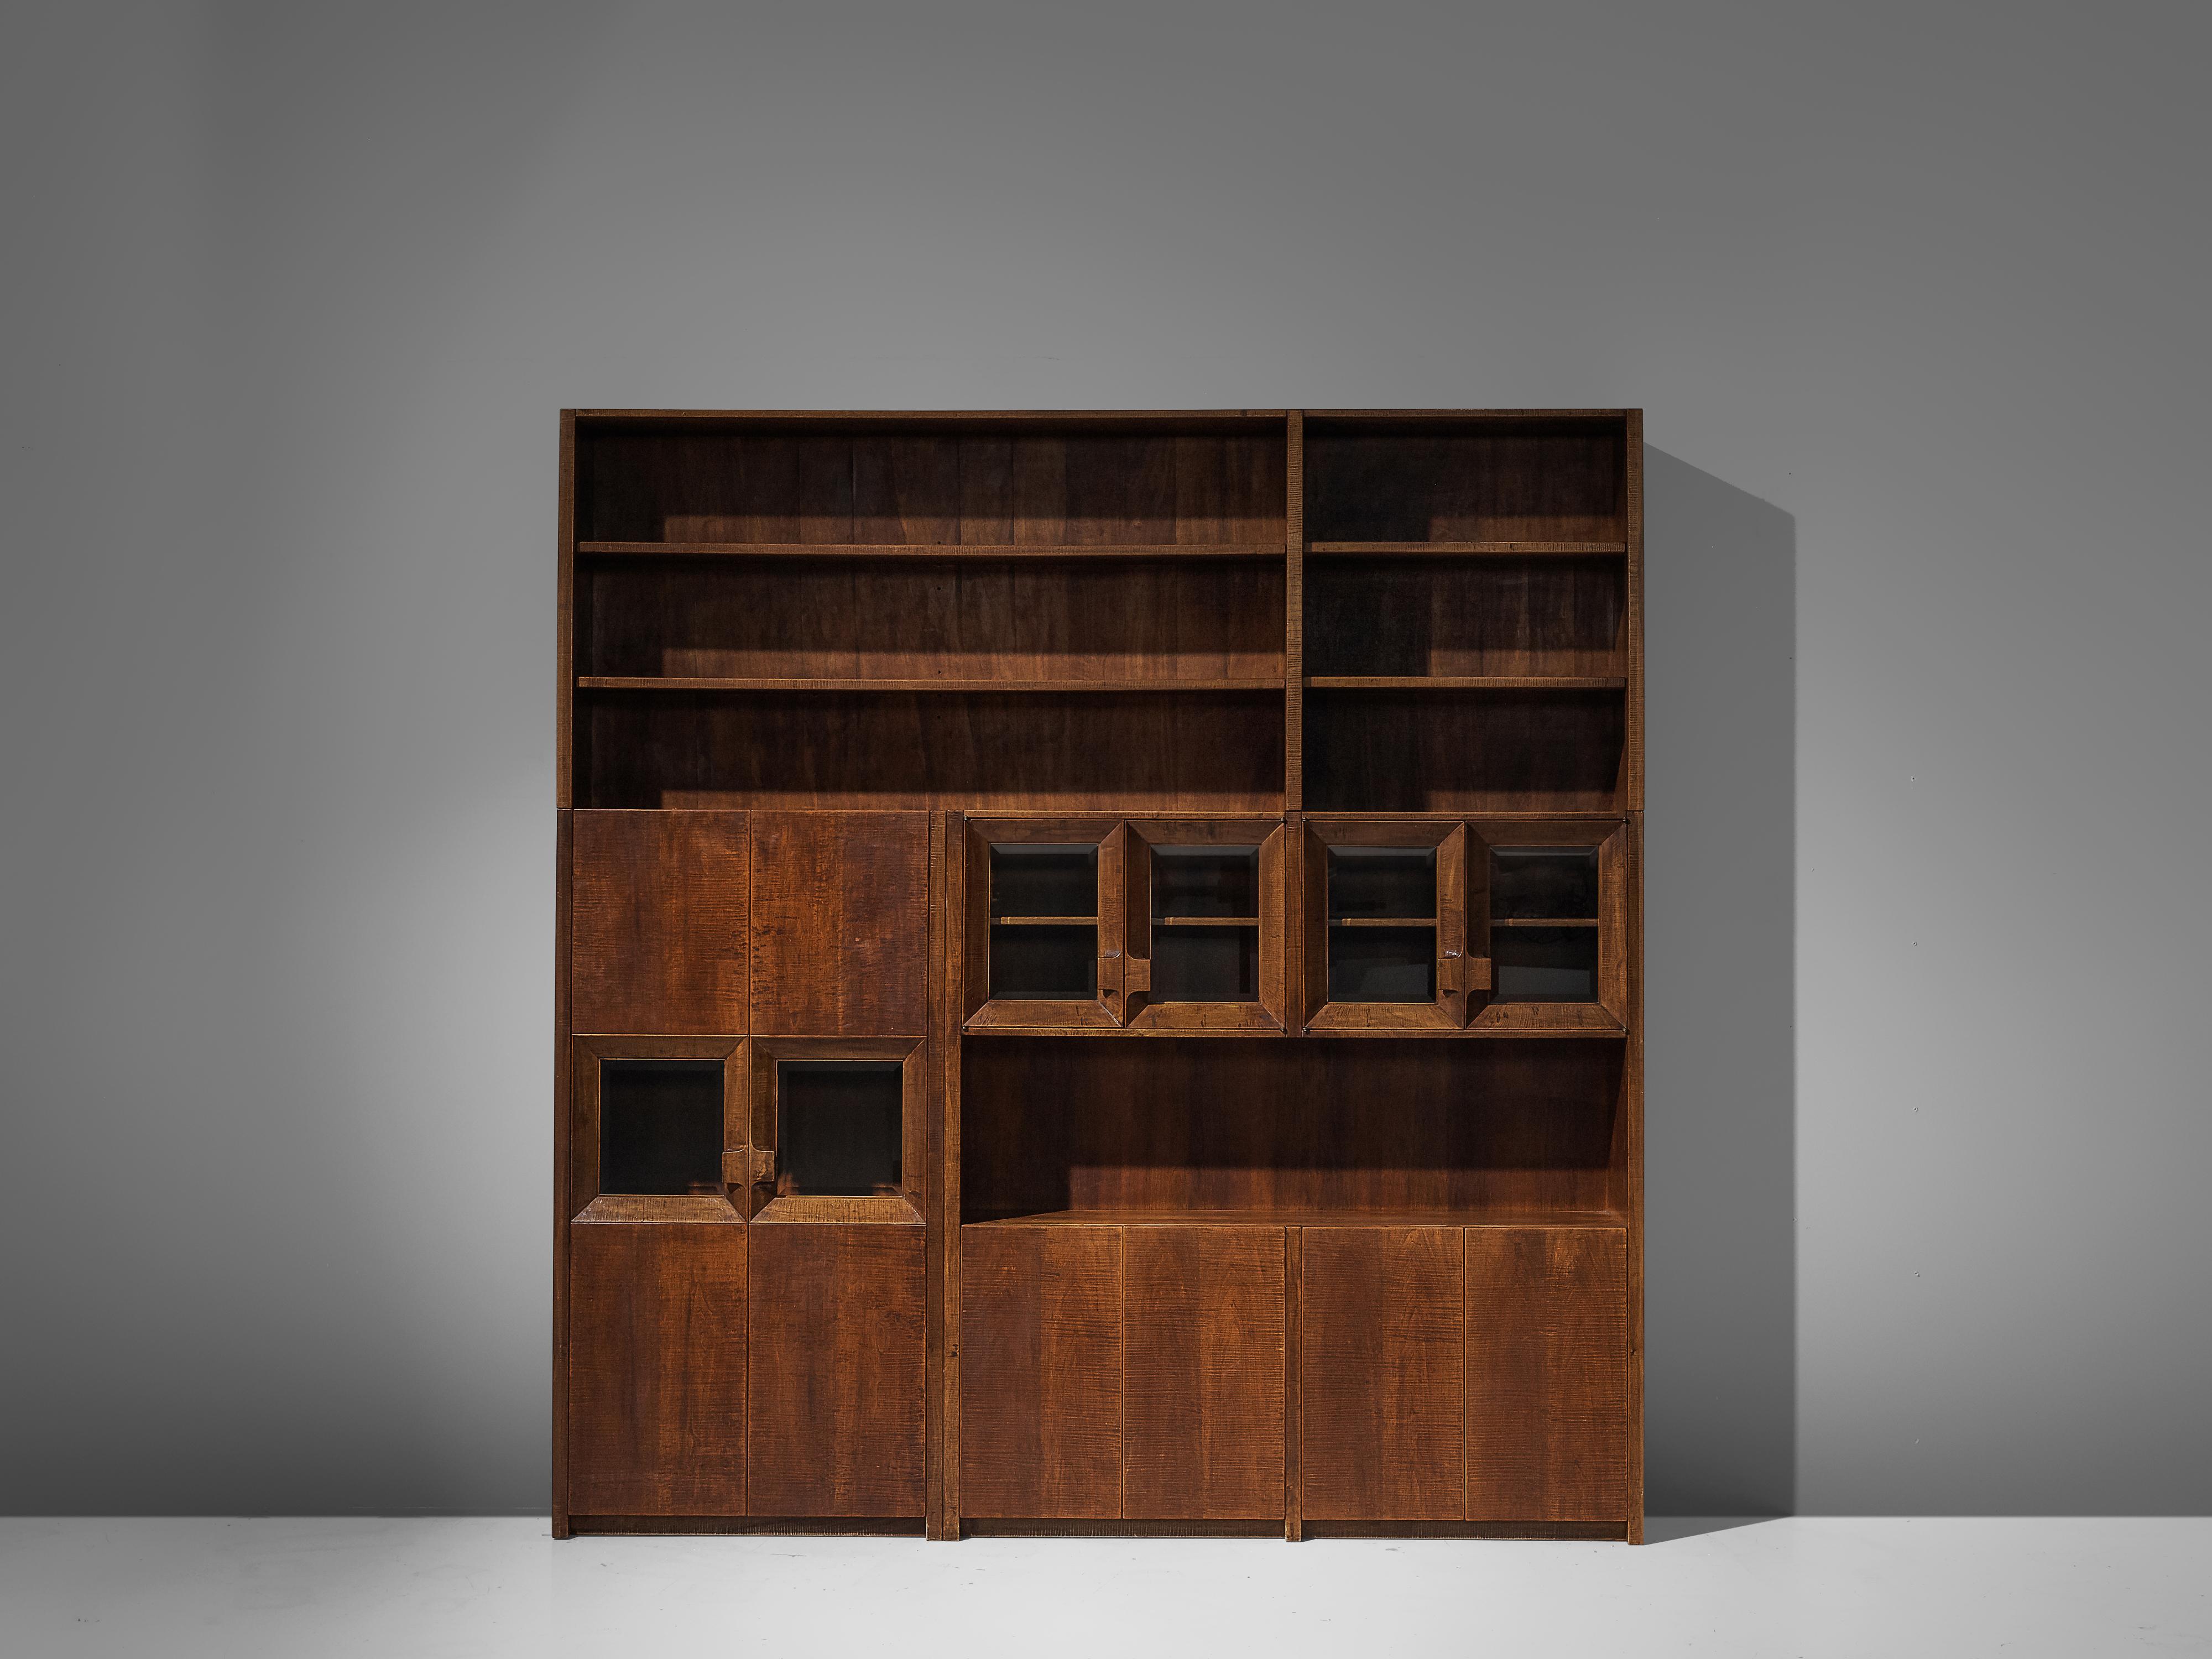 Giusseppe Rivadossi, bookcase, oak, Italy, circa 1970

An exceptional cabinet by the Italian sculptor and designer Giuseppe Rivadossi, featuring a high level of craftsmanship in woodwork. The wood is completely carved with gouge cut, which gives